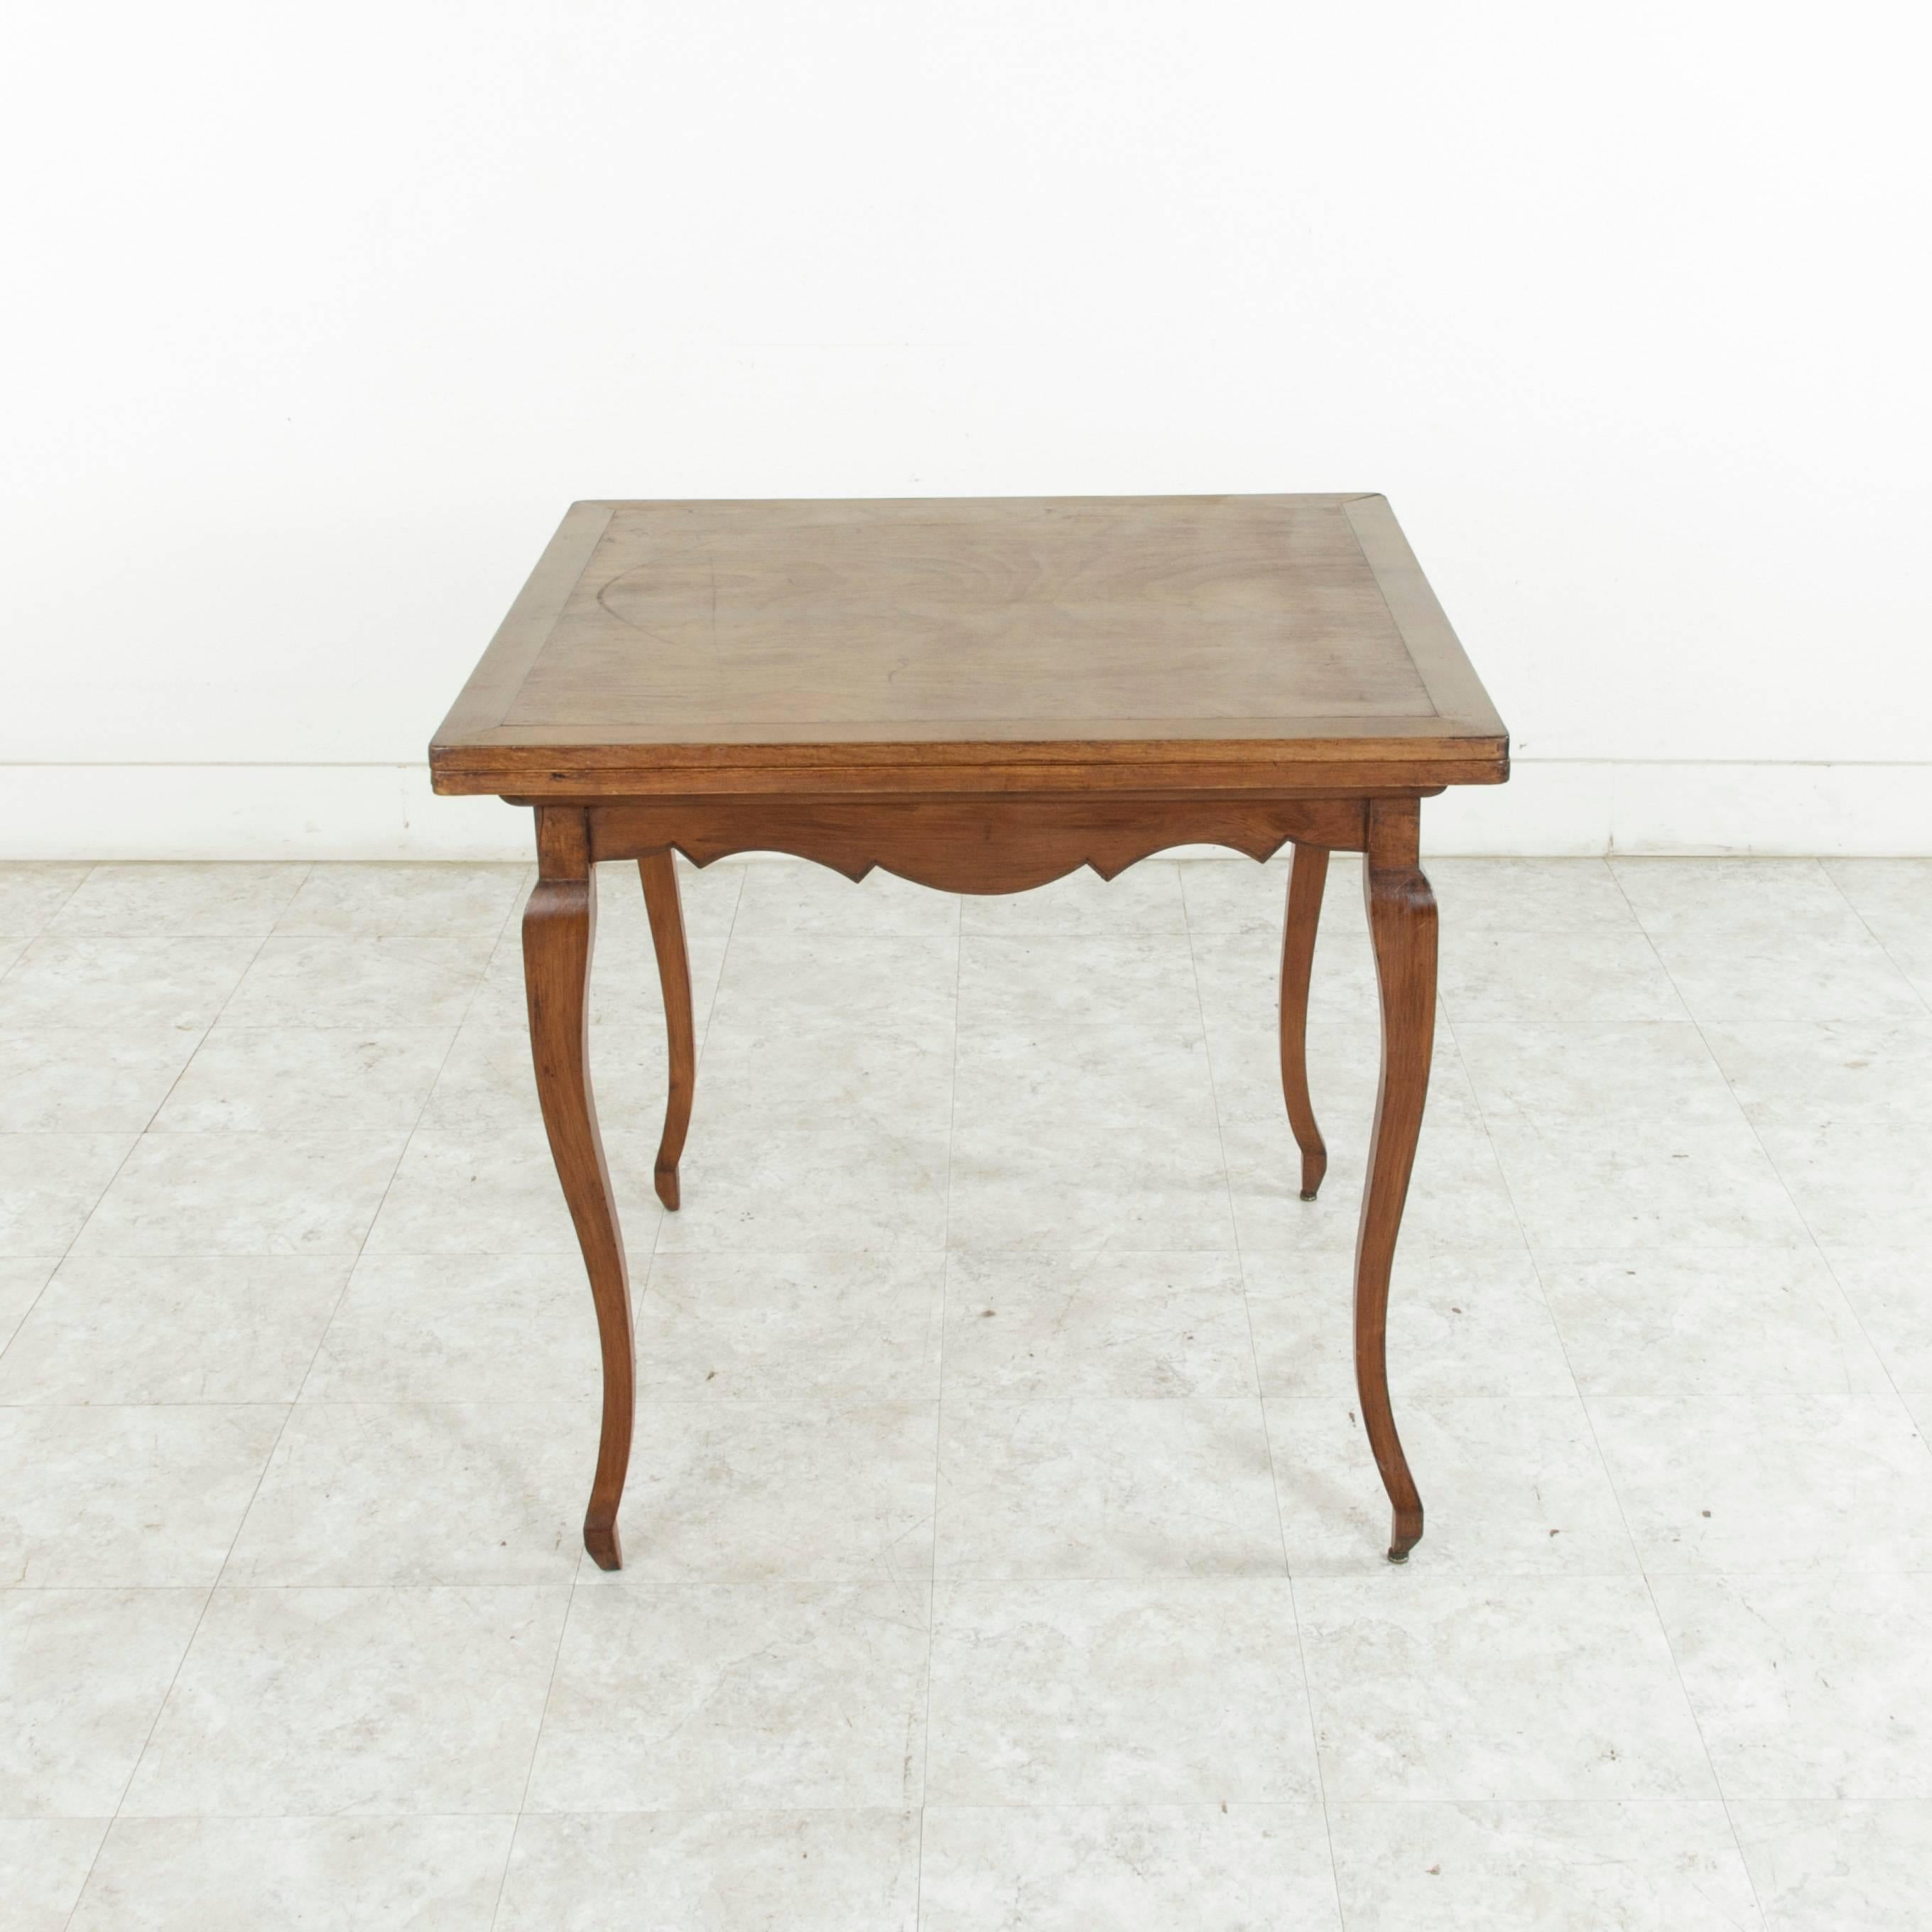 This midcentury Louis XV style cheerywood game table features a 33 inch square top that slides and unfolds to double in size with an extended tabletop length of 66 inches. Resting on Classic gently curved cabriole legs, this piece would be ideal in